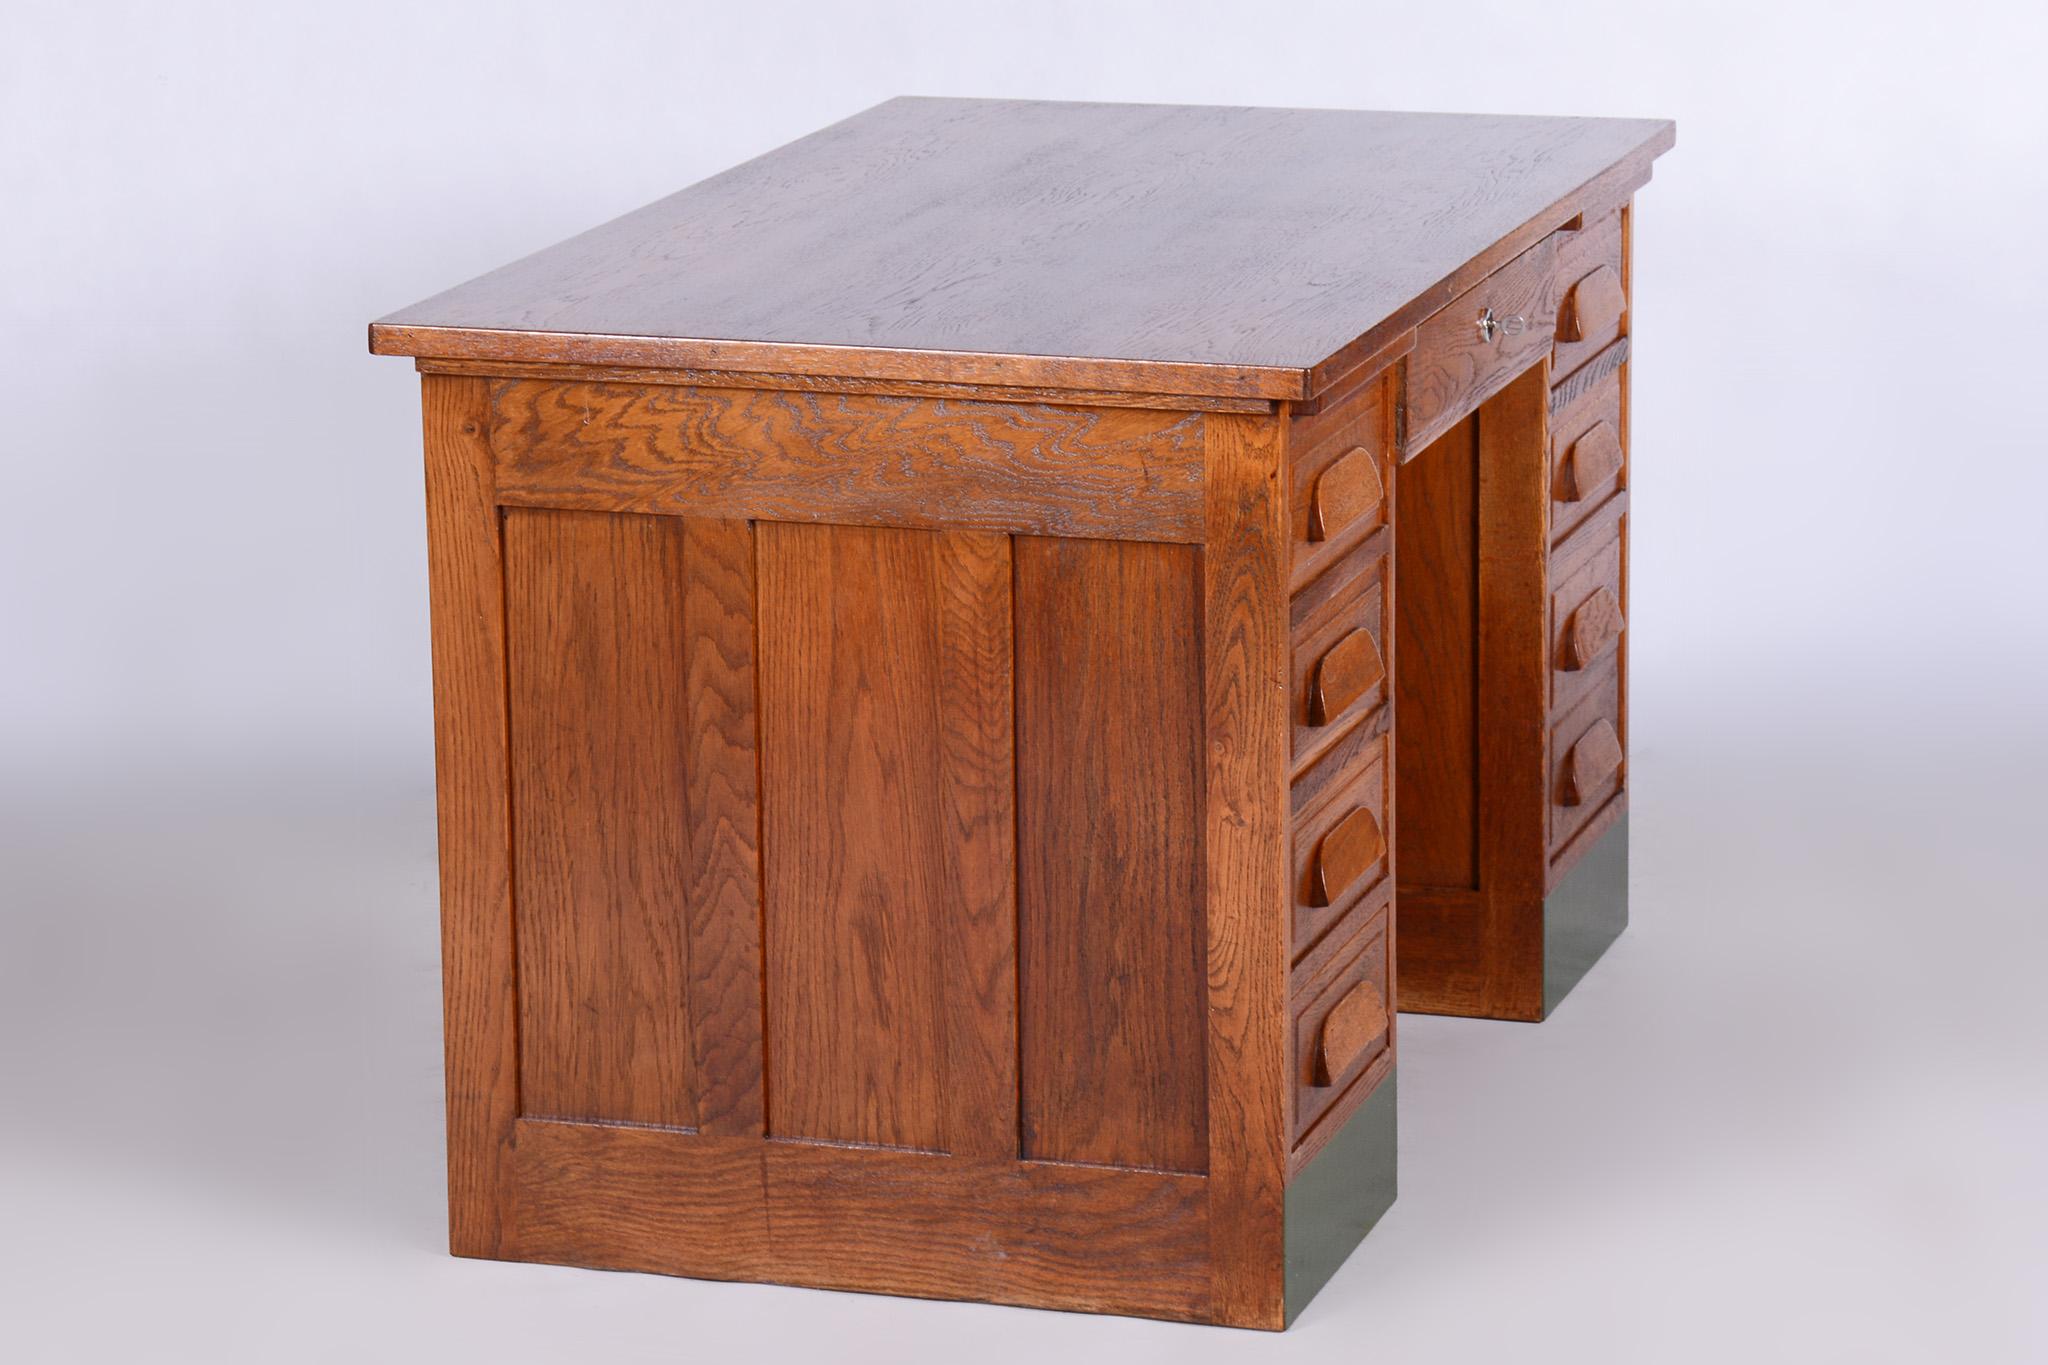 Restored Art Deco Solid Oak Writing Desk Made in the 1930s, Czechia For Sale 2